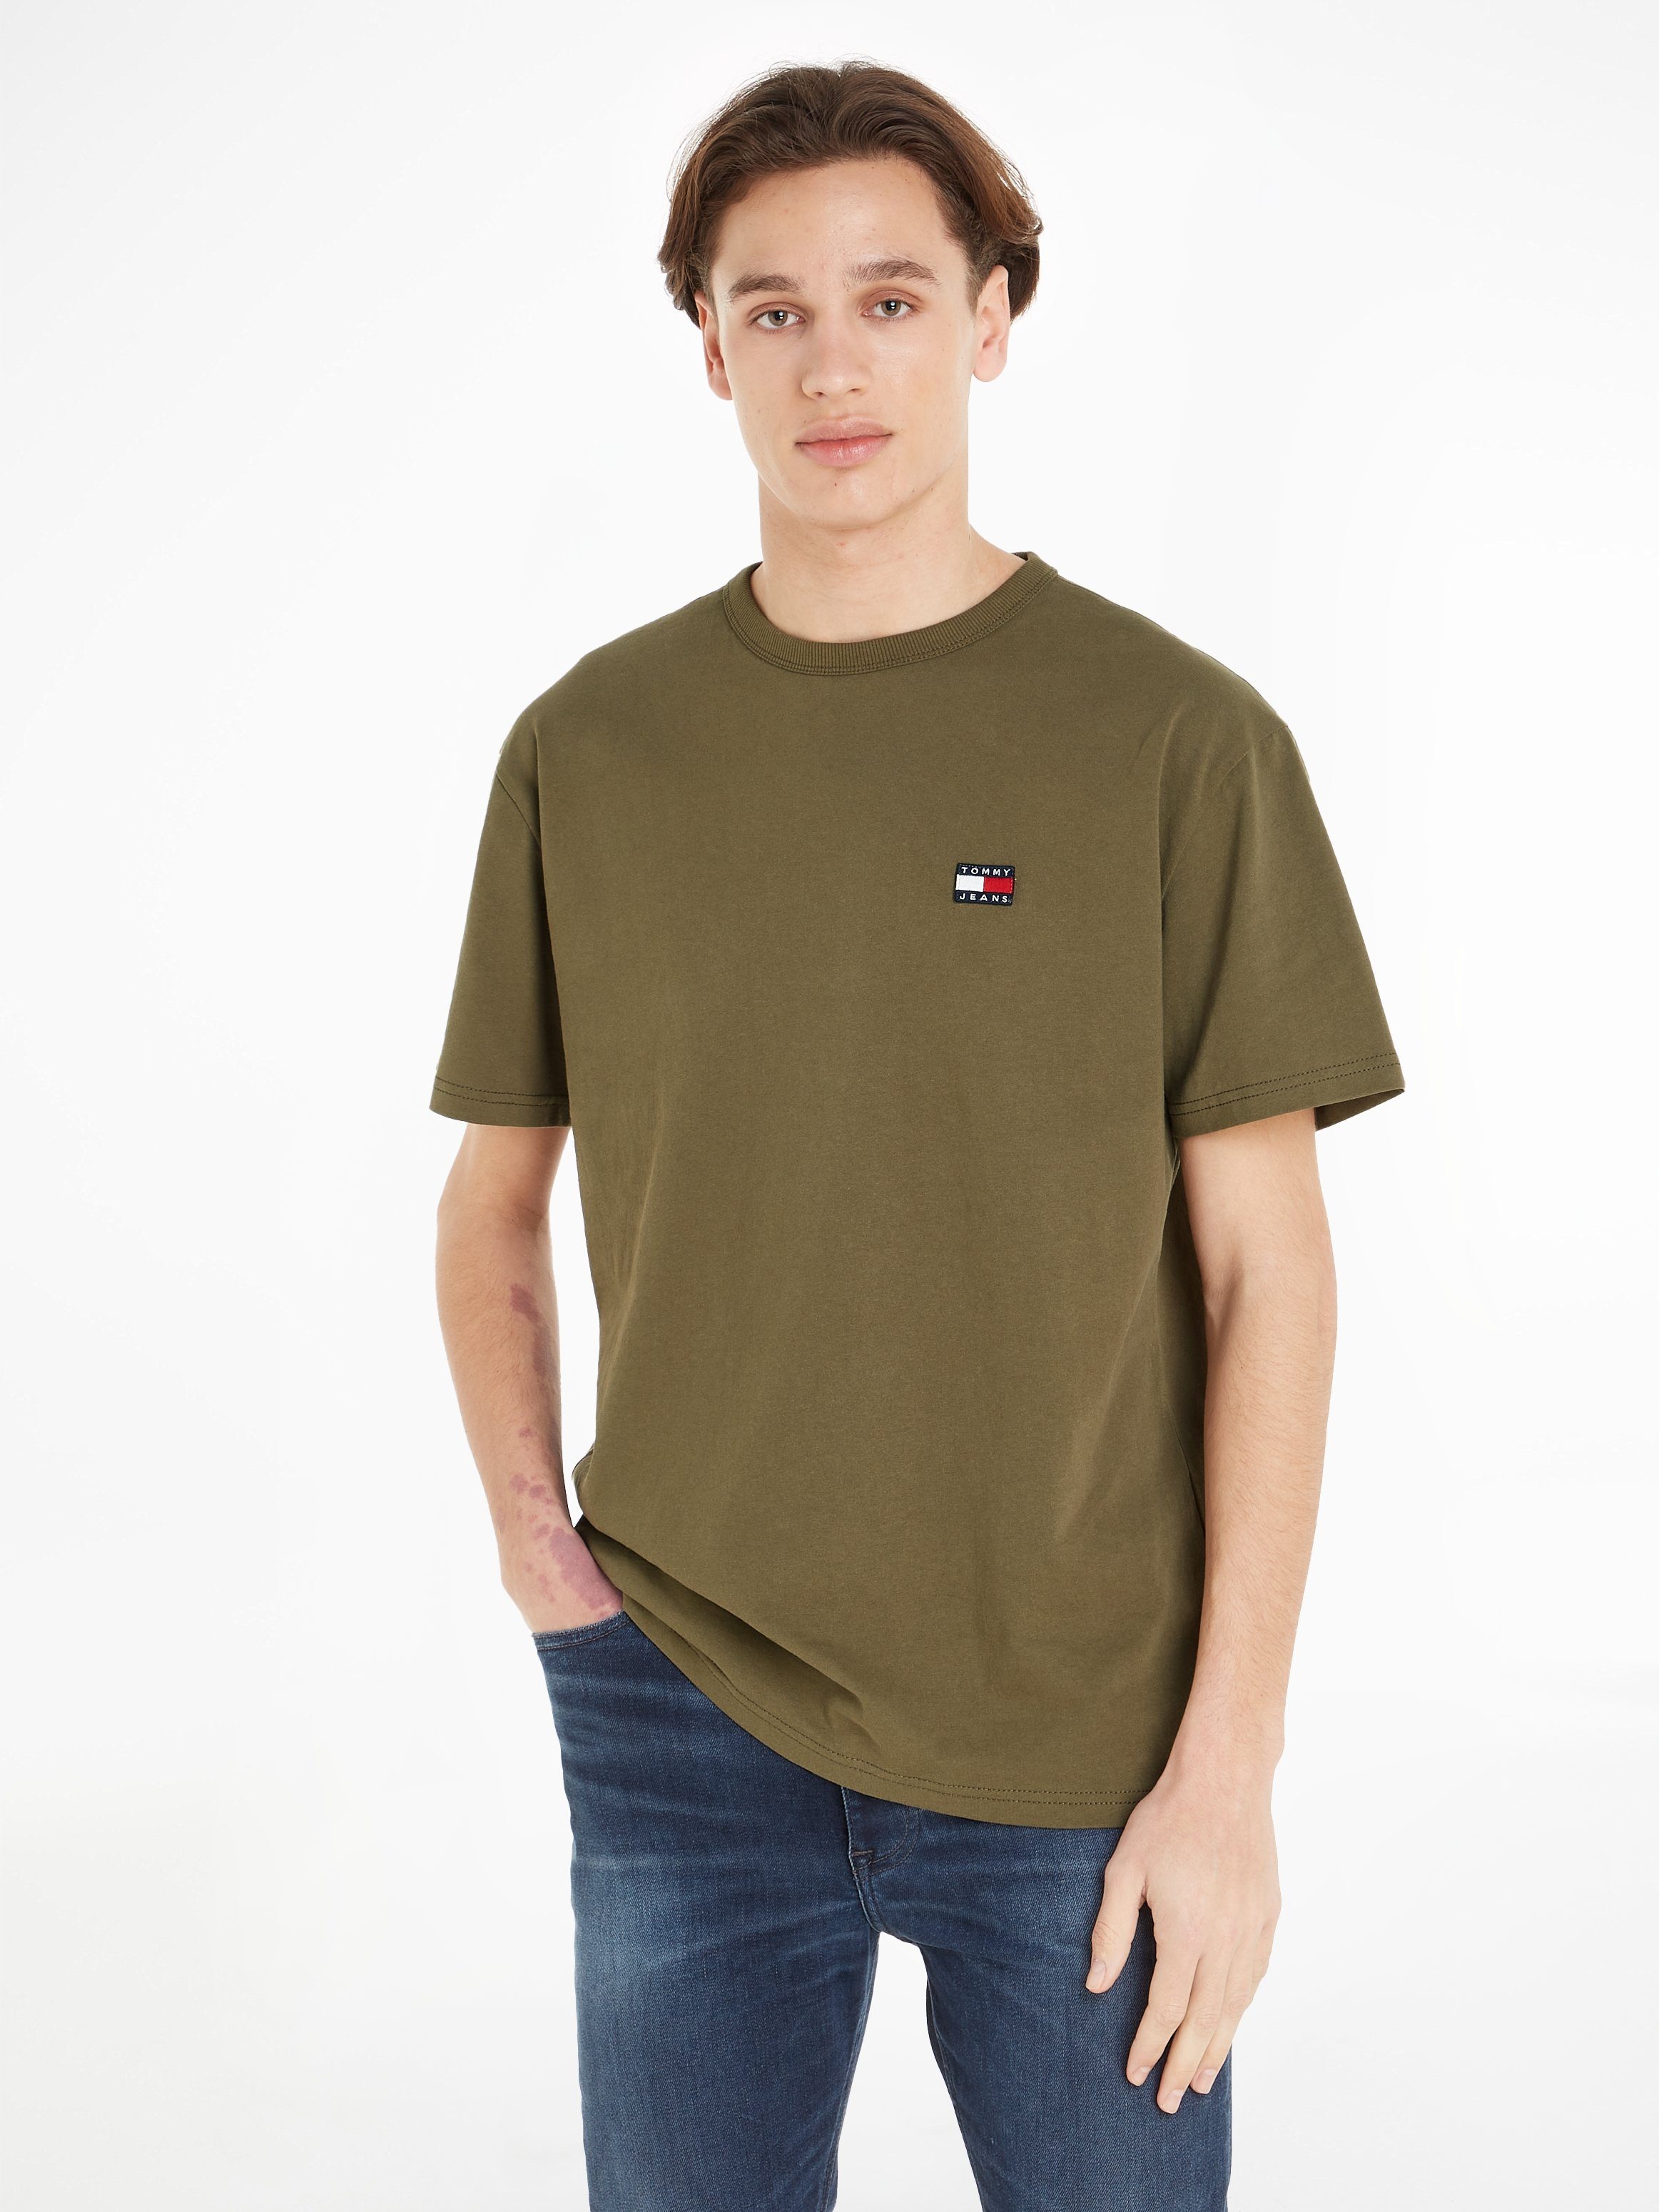 Olive XS BADGE TJM Jeans TOMMY TEE Tommy Drab T-Shirt Green CLSC